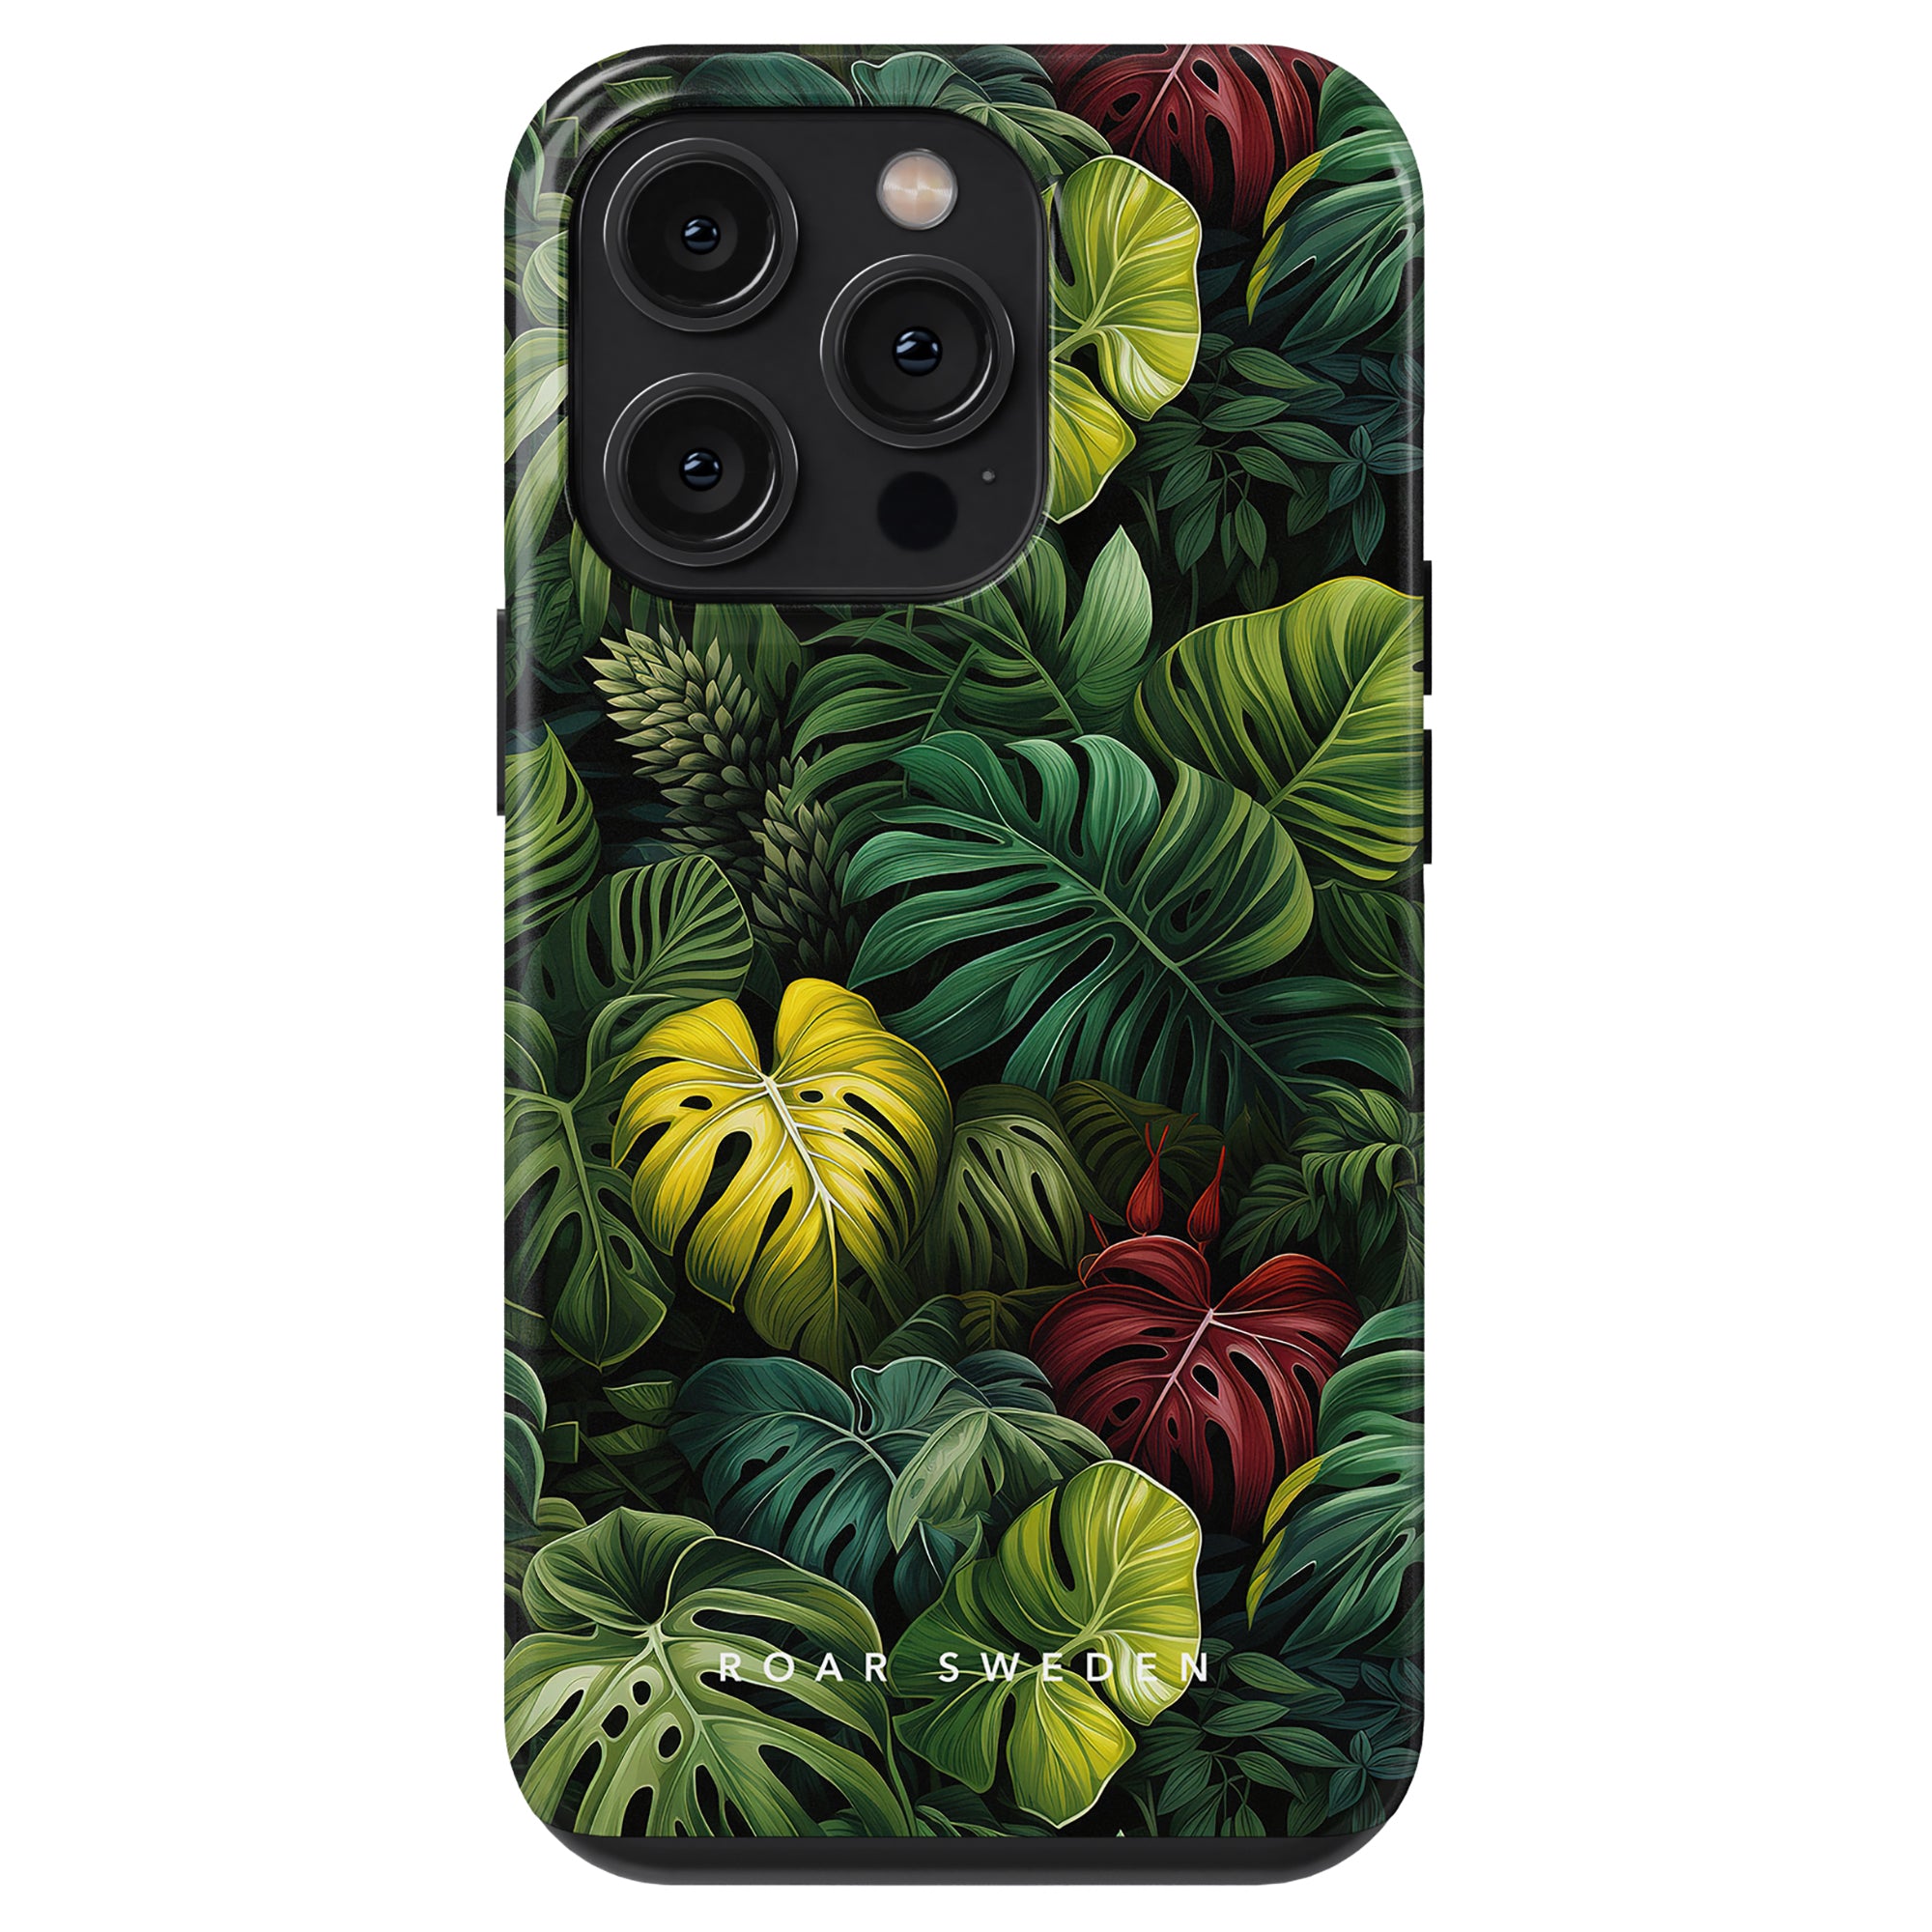 A smartphone with a tropical leaf-themed case featuring various green, yellow, and red leaves from the Jungle Collection and "Roar Sweden" branding. The design includes stunning Monstera Deliciosa leaves for a vibrant, lush look: Deliciosa - Tough Case.